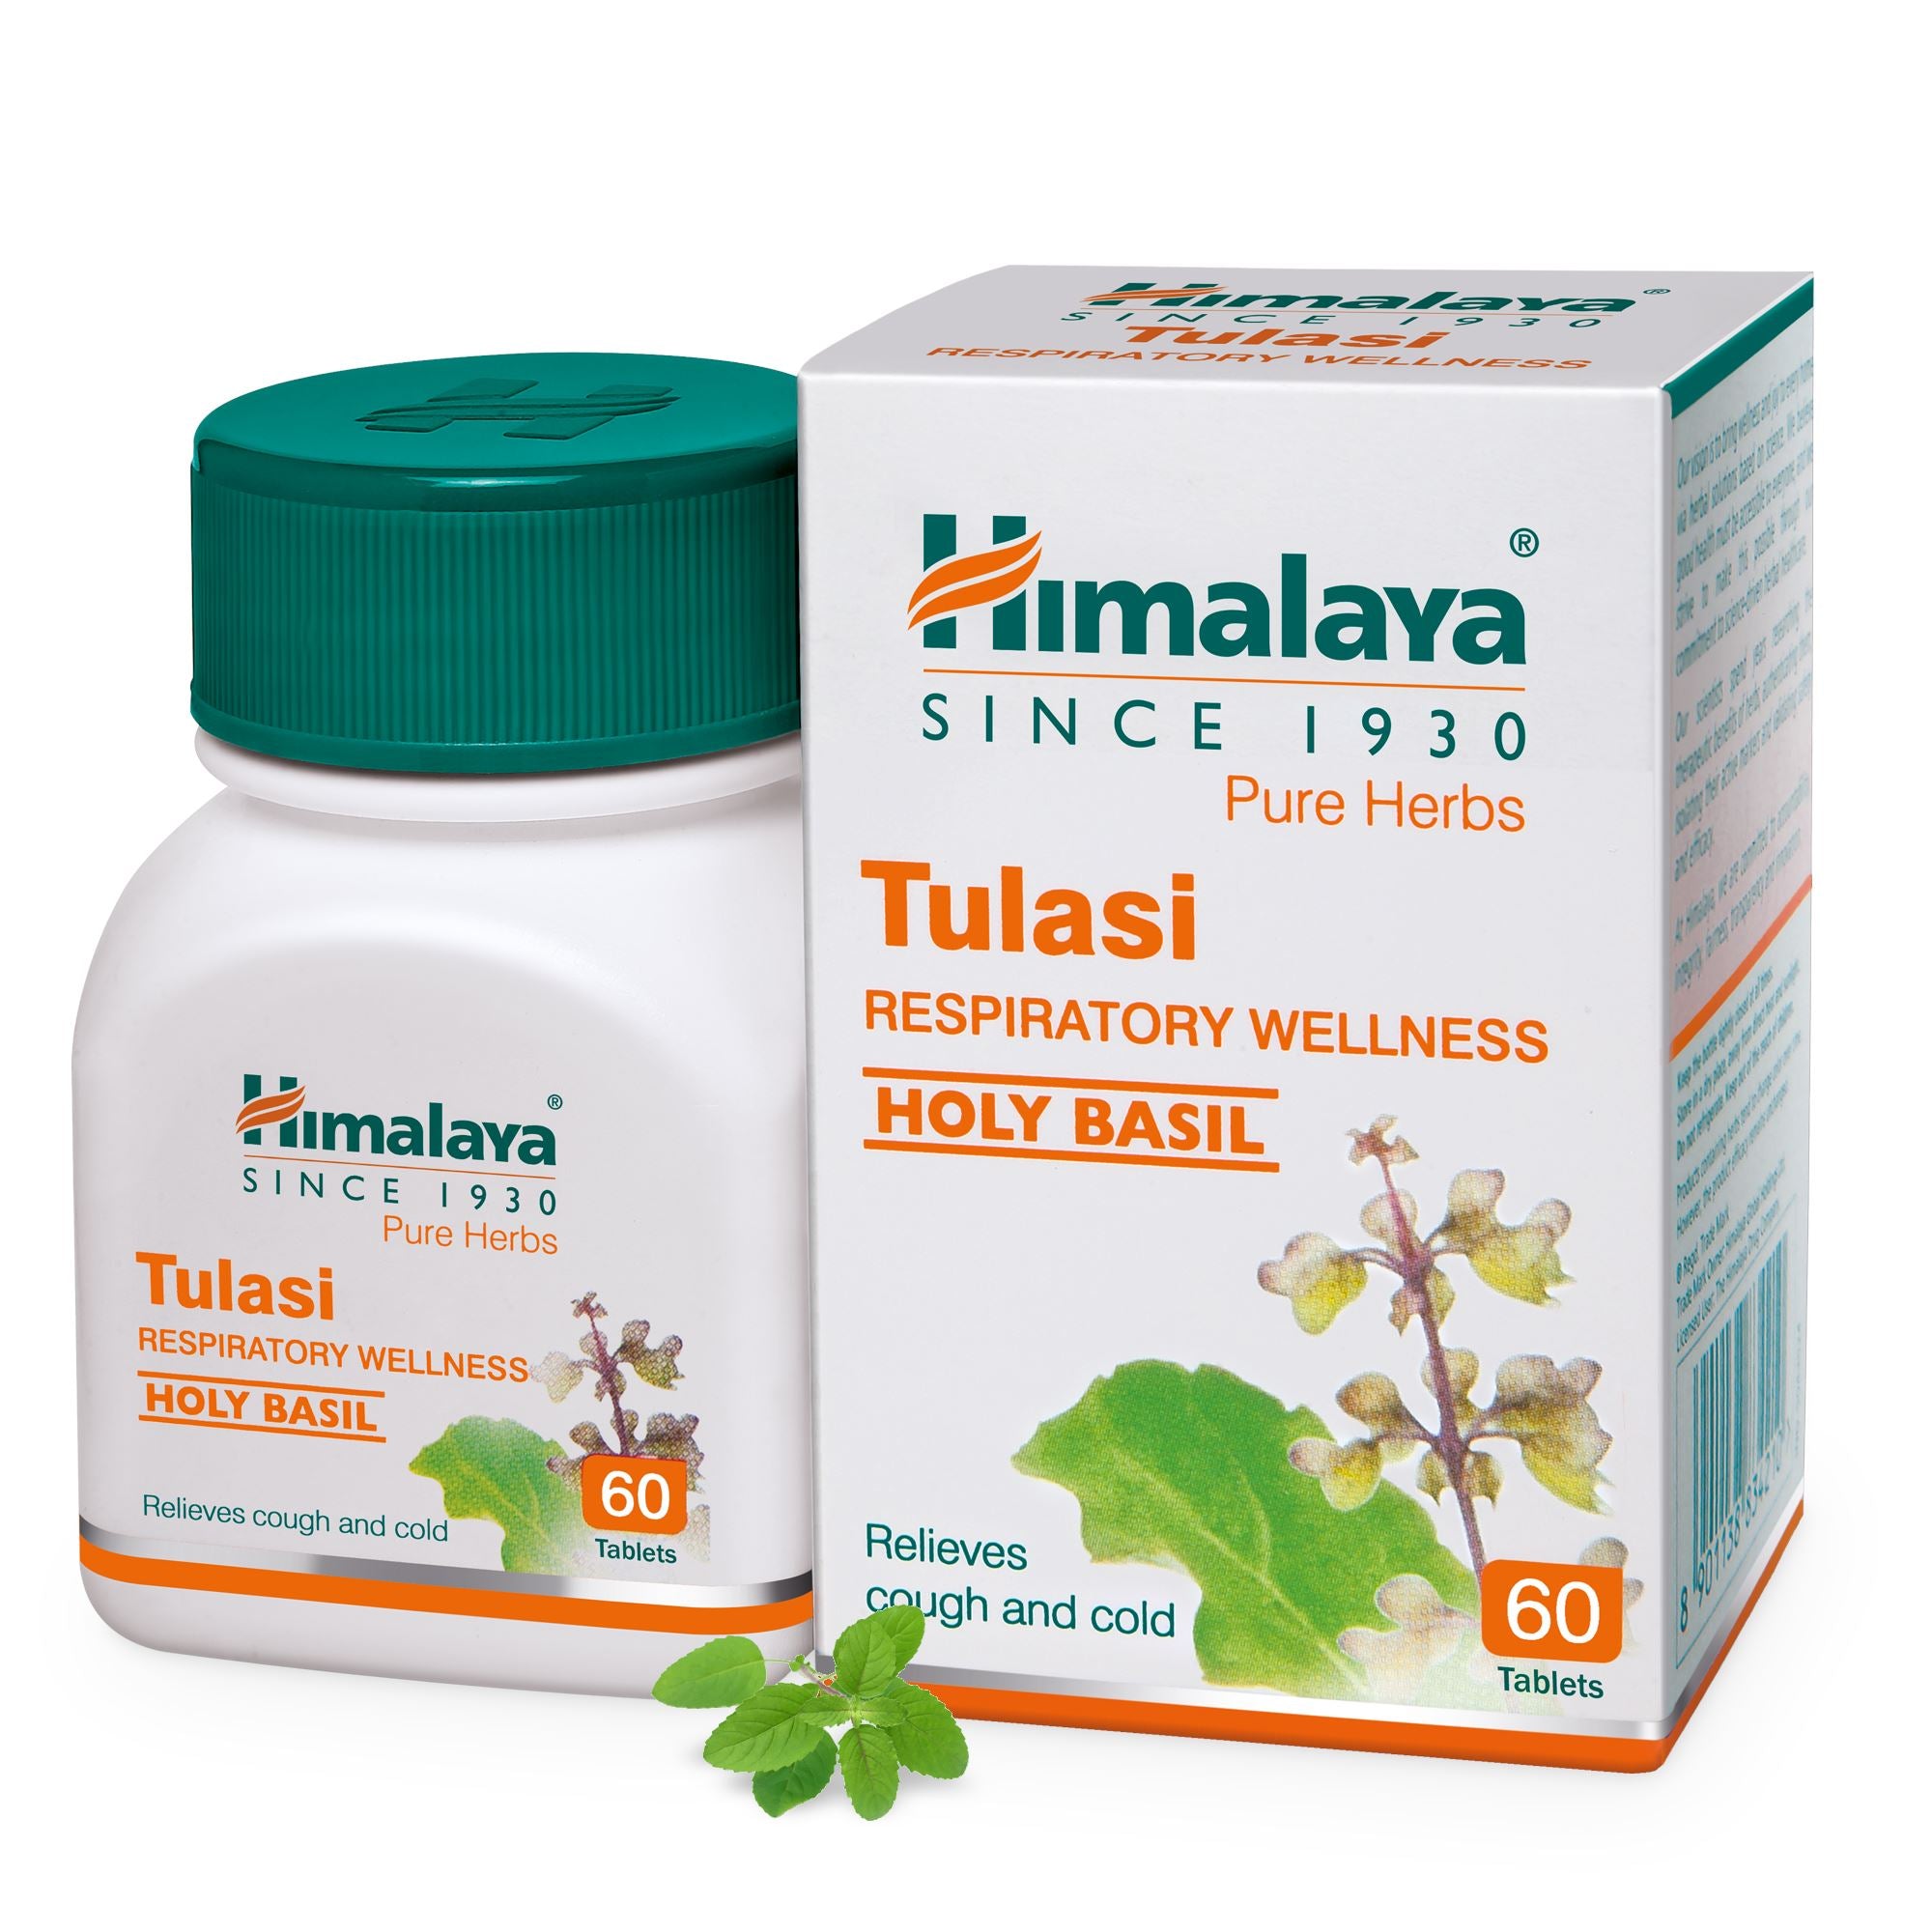 Himalaya Tulasi - Relieves cough and cold